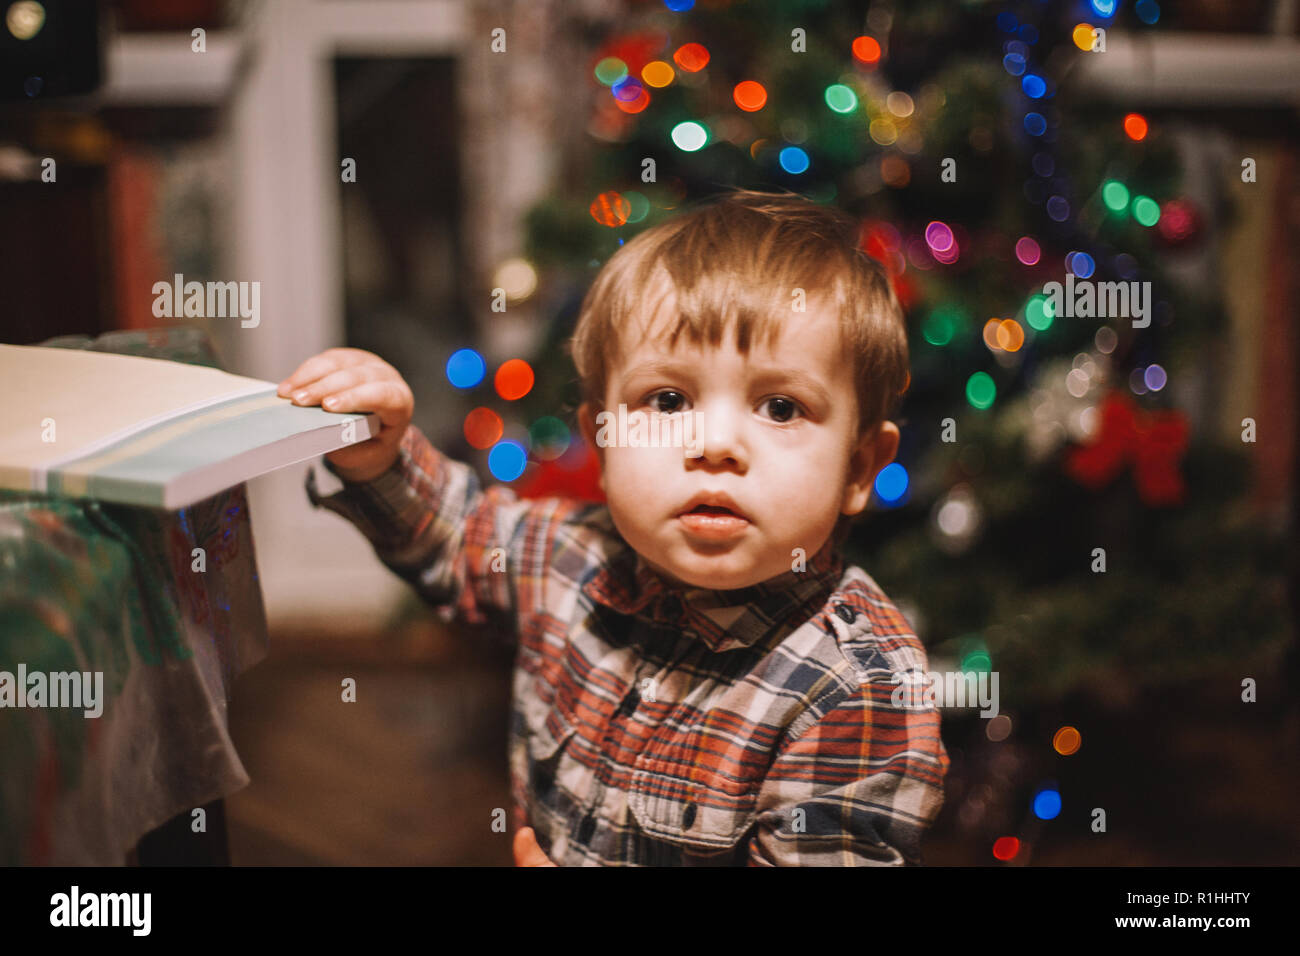 Baby boy holding book while standing against Christmas tree at home Stock Photo